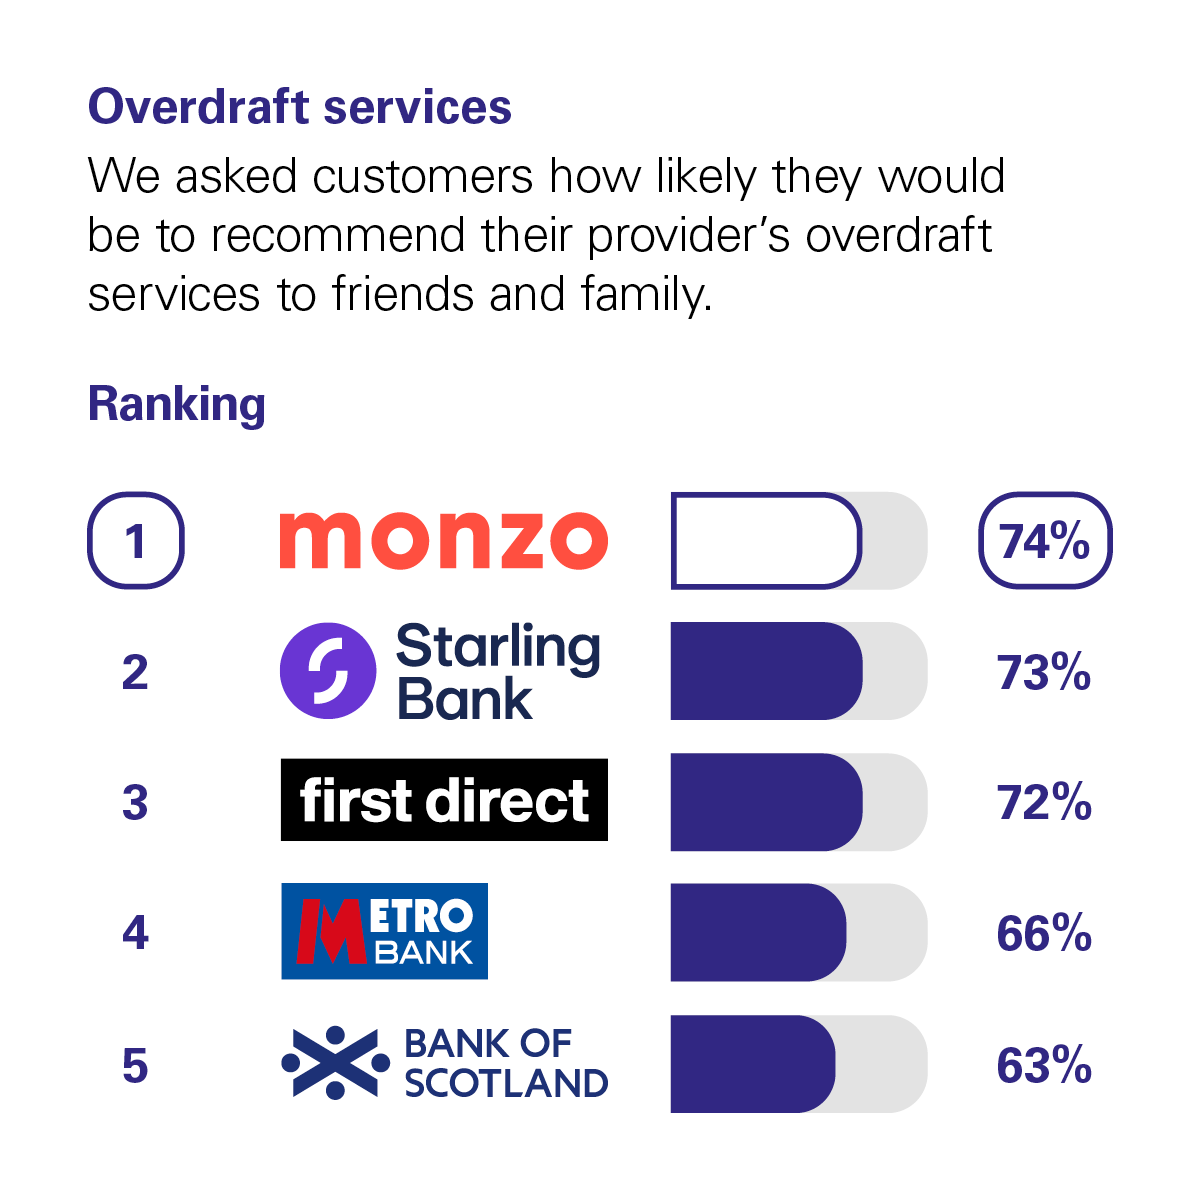 Graph showing the results of the CMA scoring of UK banks in the Overdraft Services category. The CMA asked customers how likely they would be to recommend their provider's overdraft services to friends and family. The rankings with percentage scores are: 1st Monzo with 74%. 2nd Starling Bank with 73%. 3rd First Direct with 72%. 4th Metro Bank with 66%. 5th Royal Bank of Scotland with 63%.